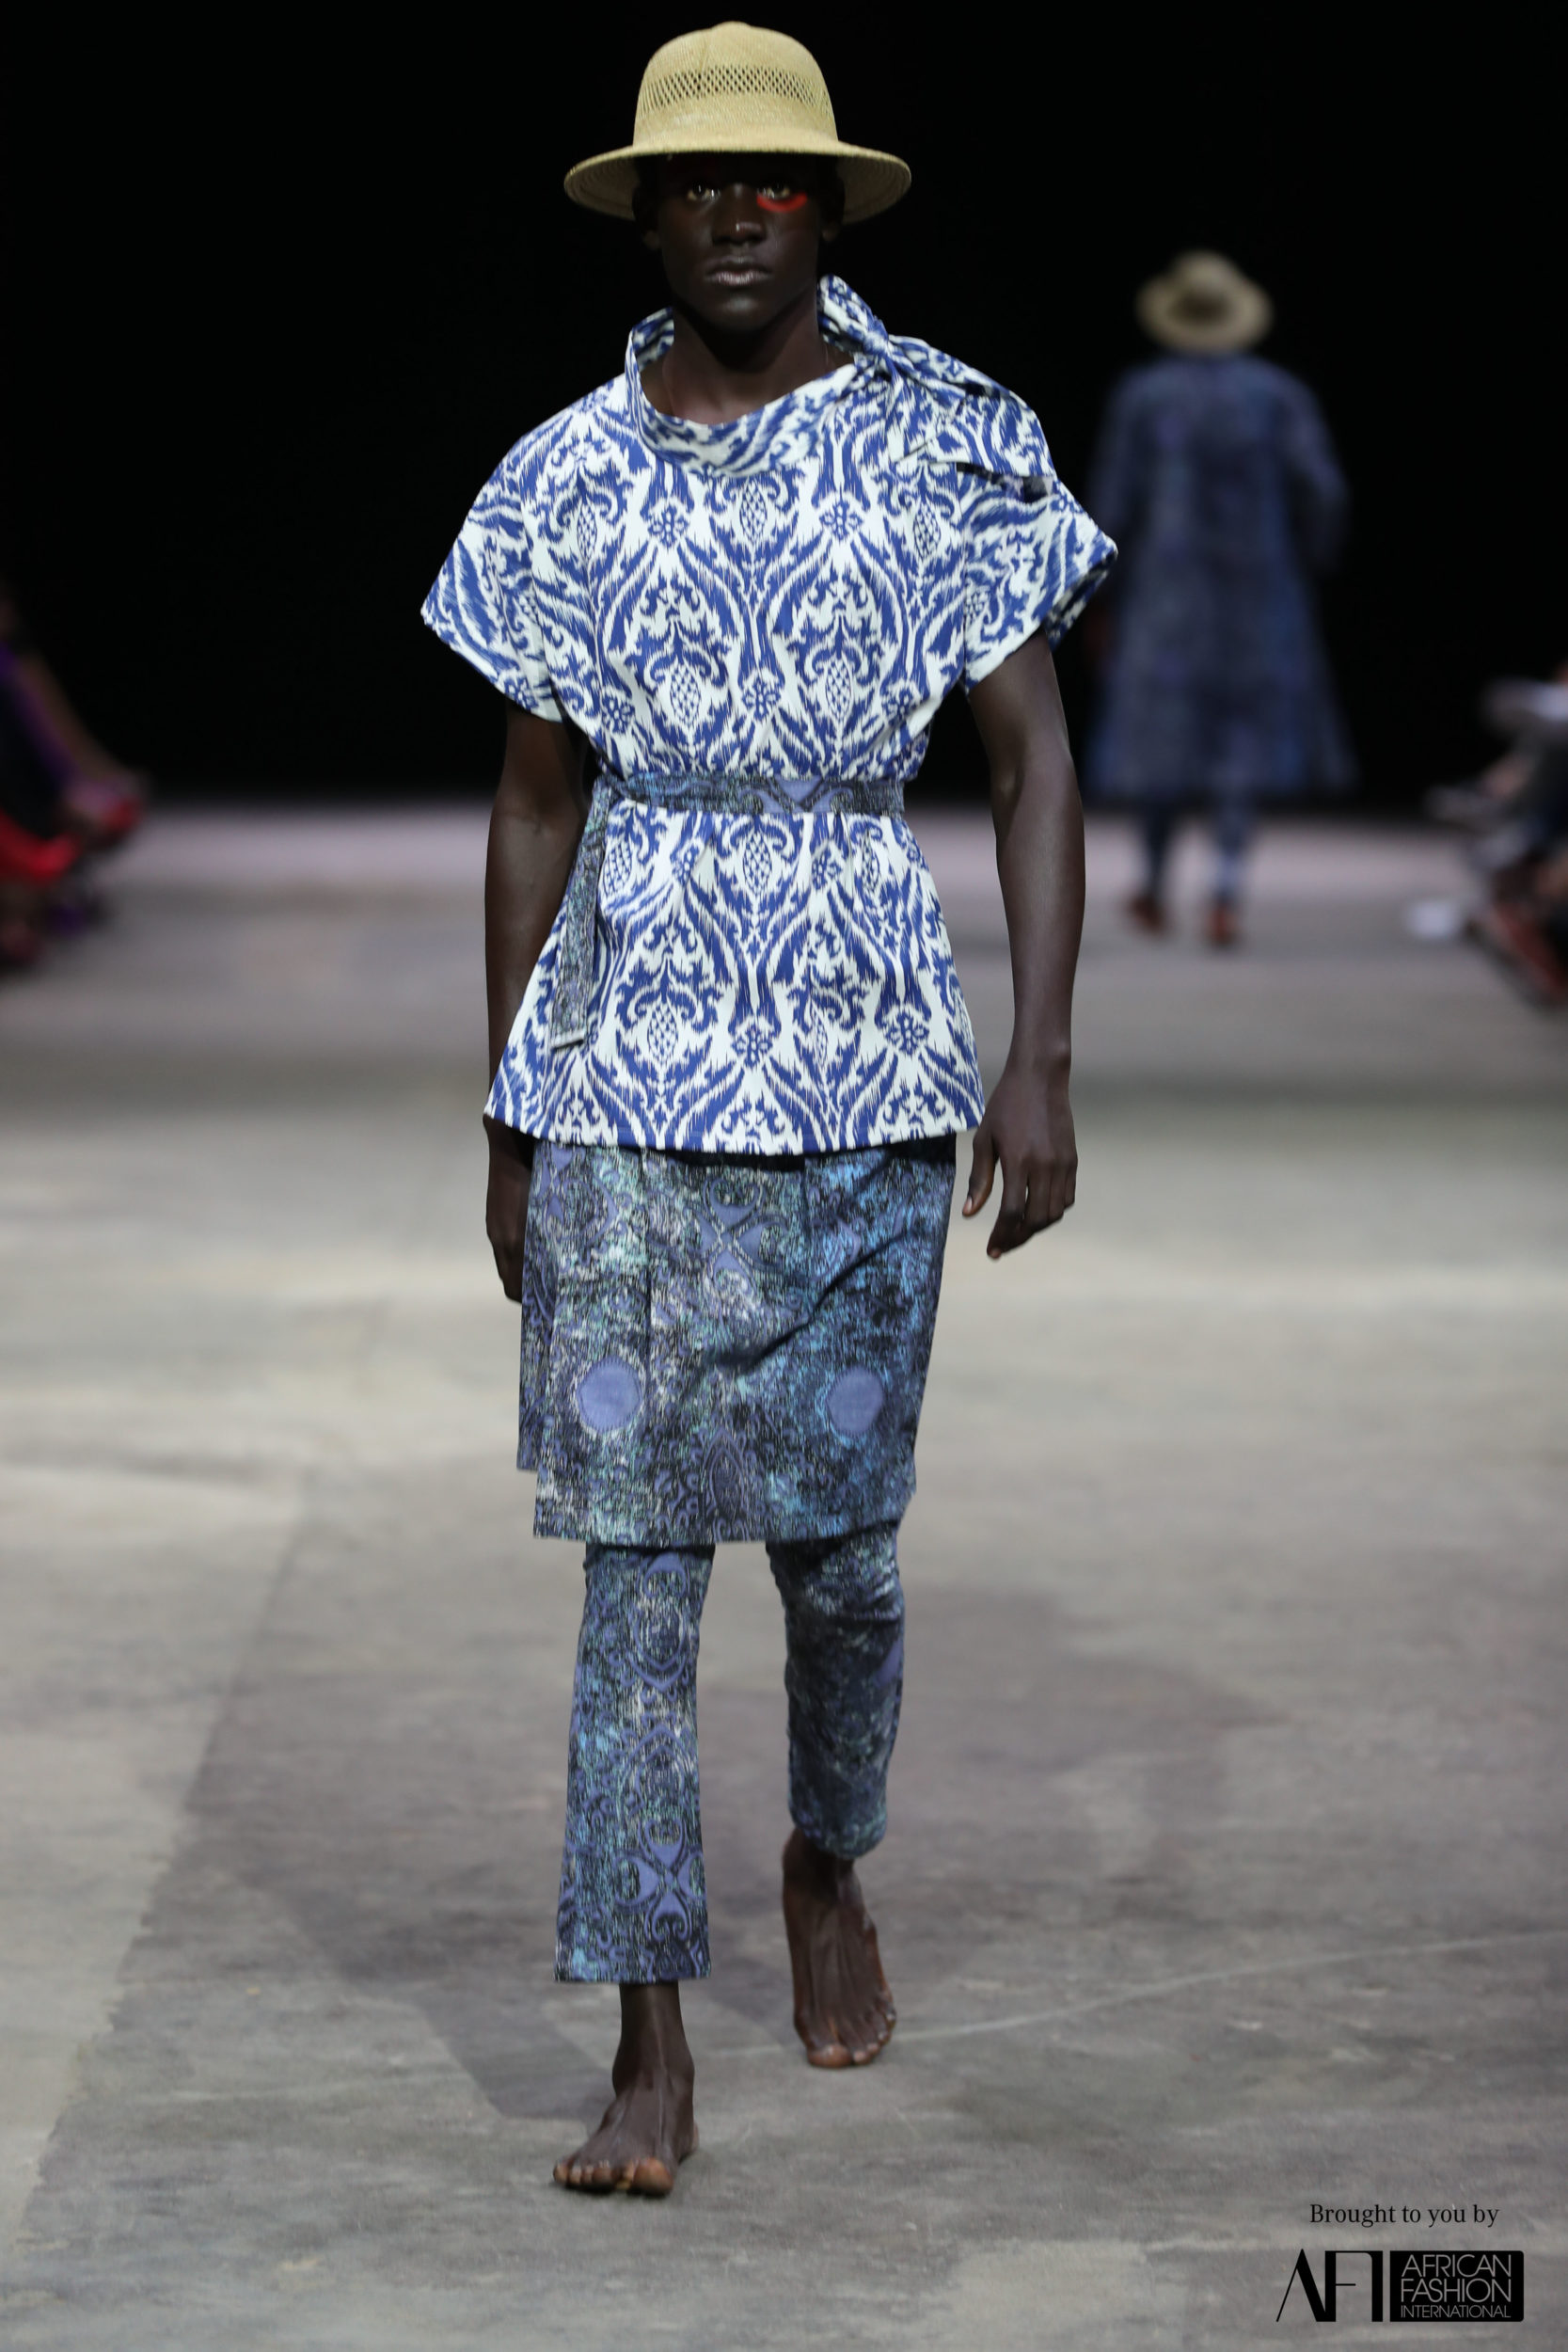 #AFICTFW18 | Africa Is Now